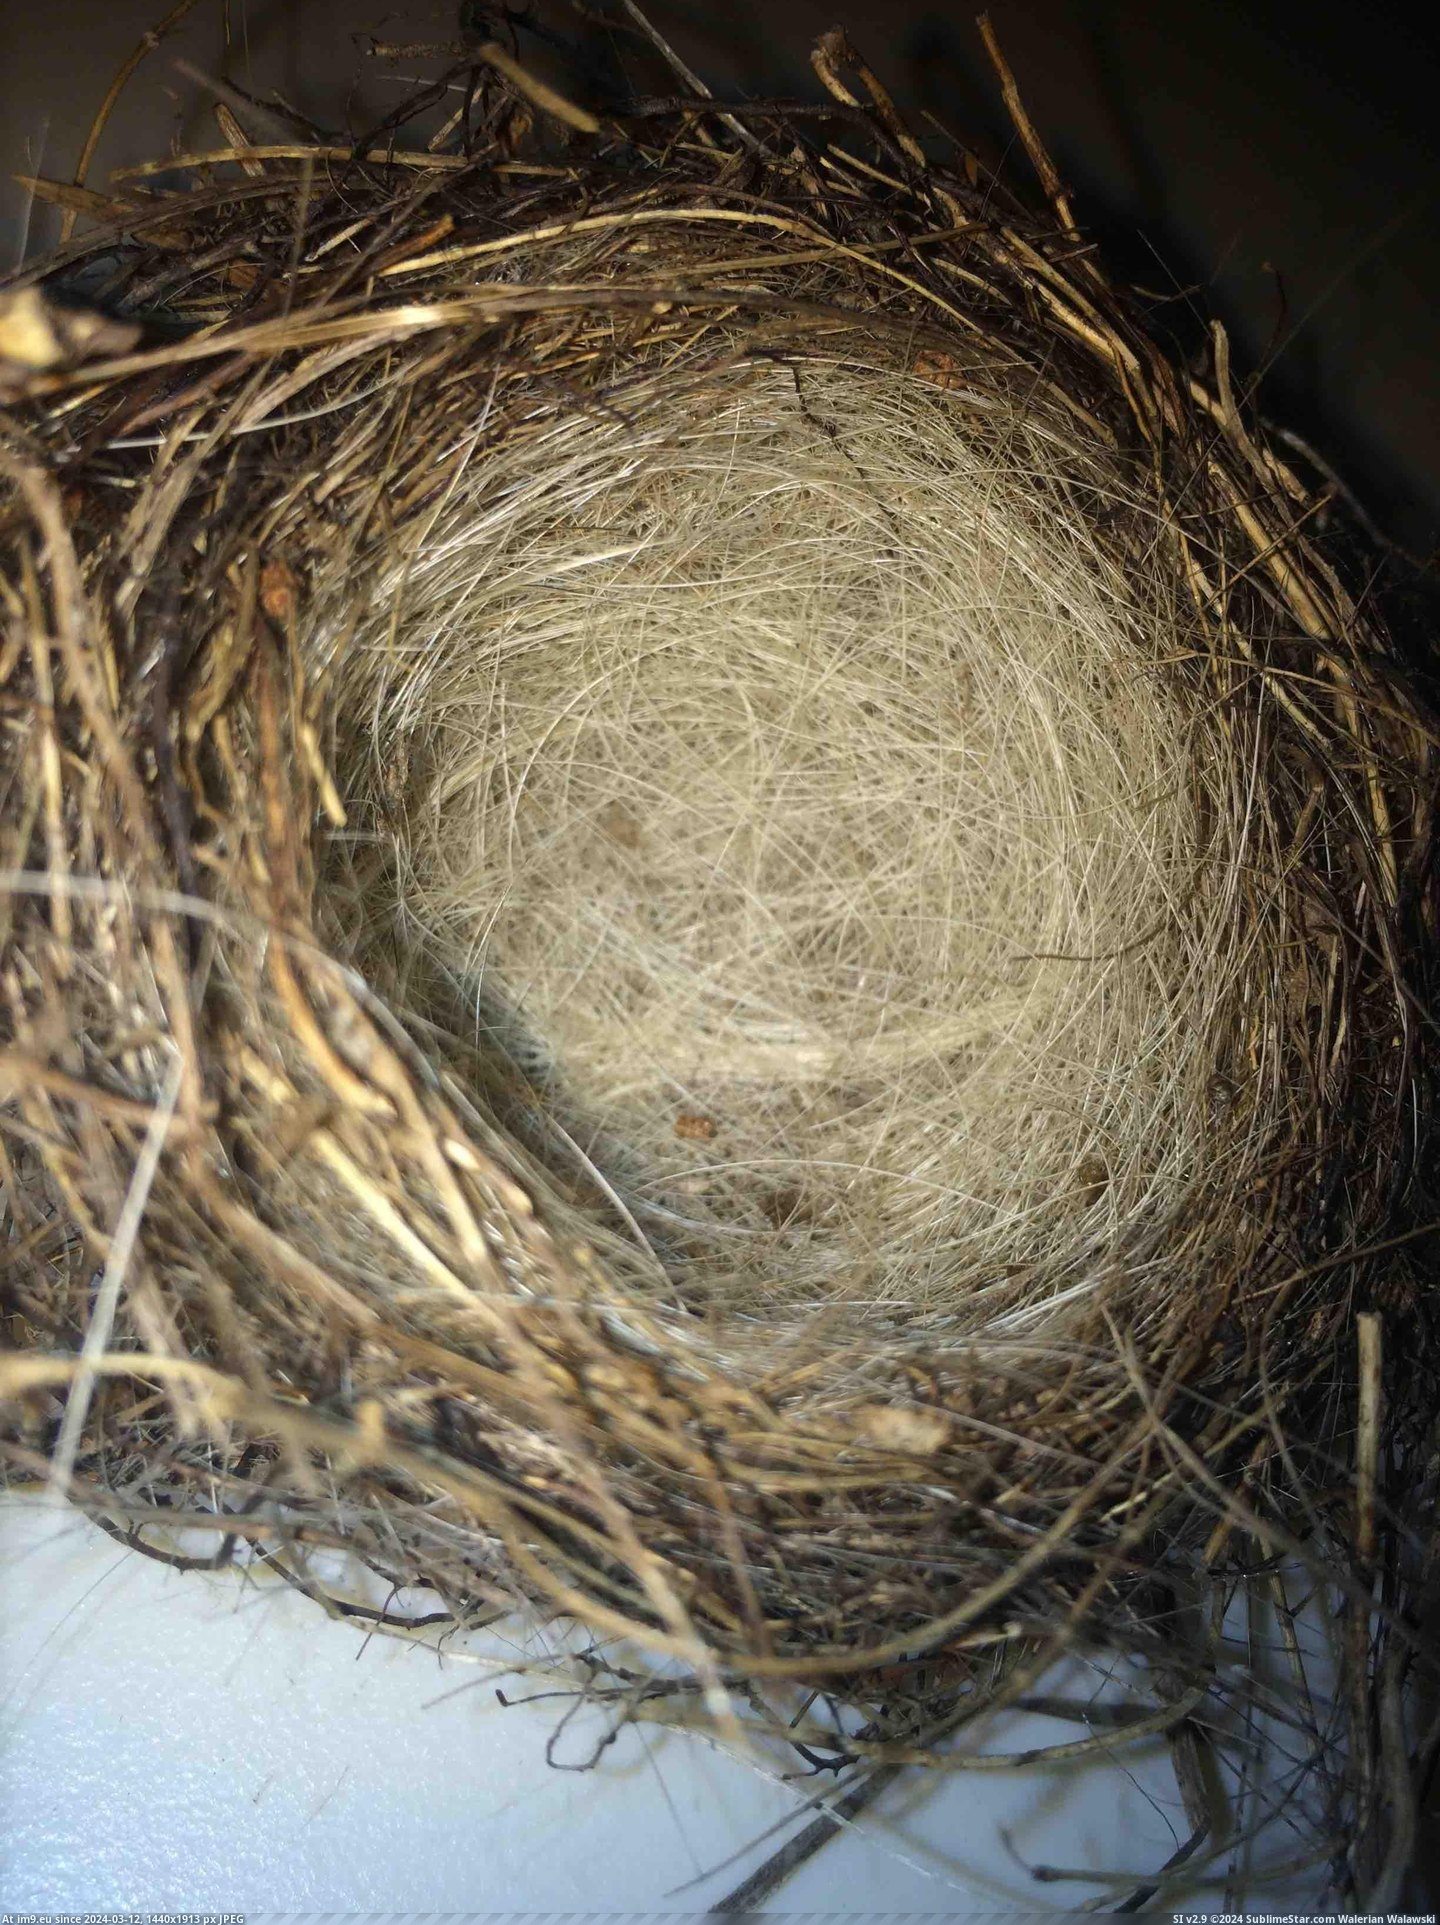 #Dog #Bird #Nest #Lined #Yard #Fur [Mildlyinteresting] Found a bird nest in my yard. The inside is lined with my dog's fur. Pic. (Image of album My r/MILDLYINTERESTING favs))